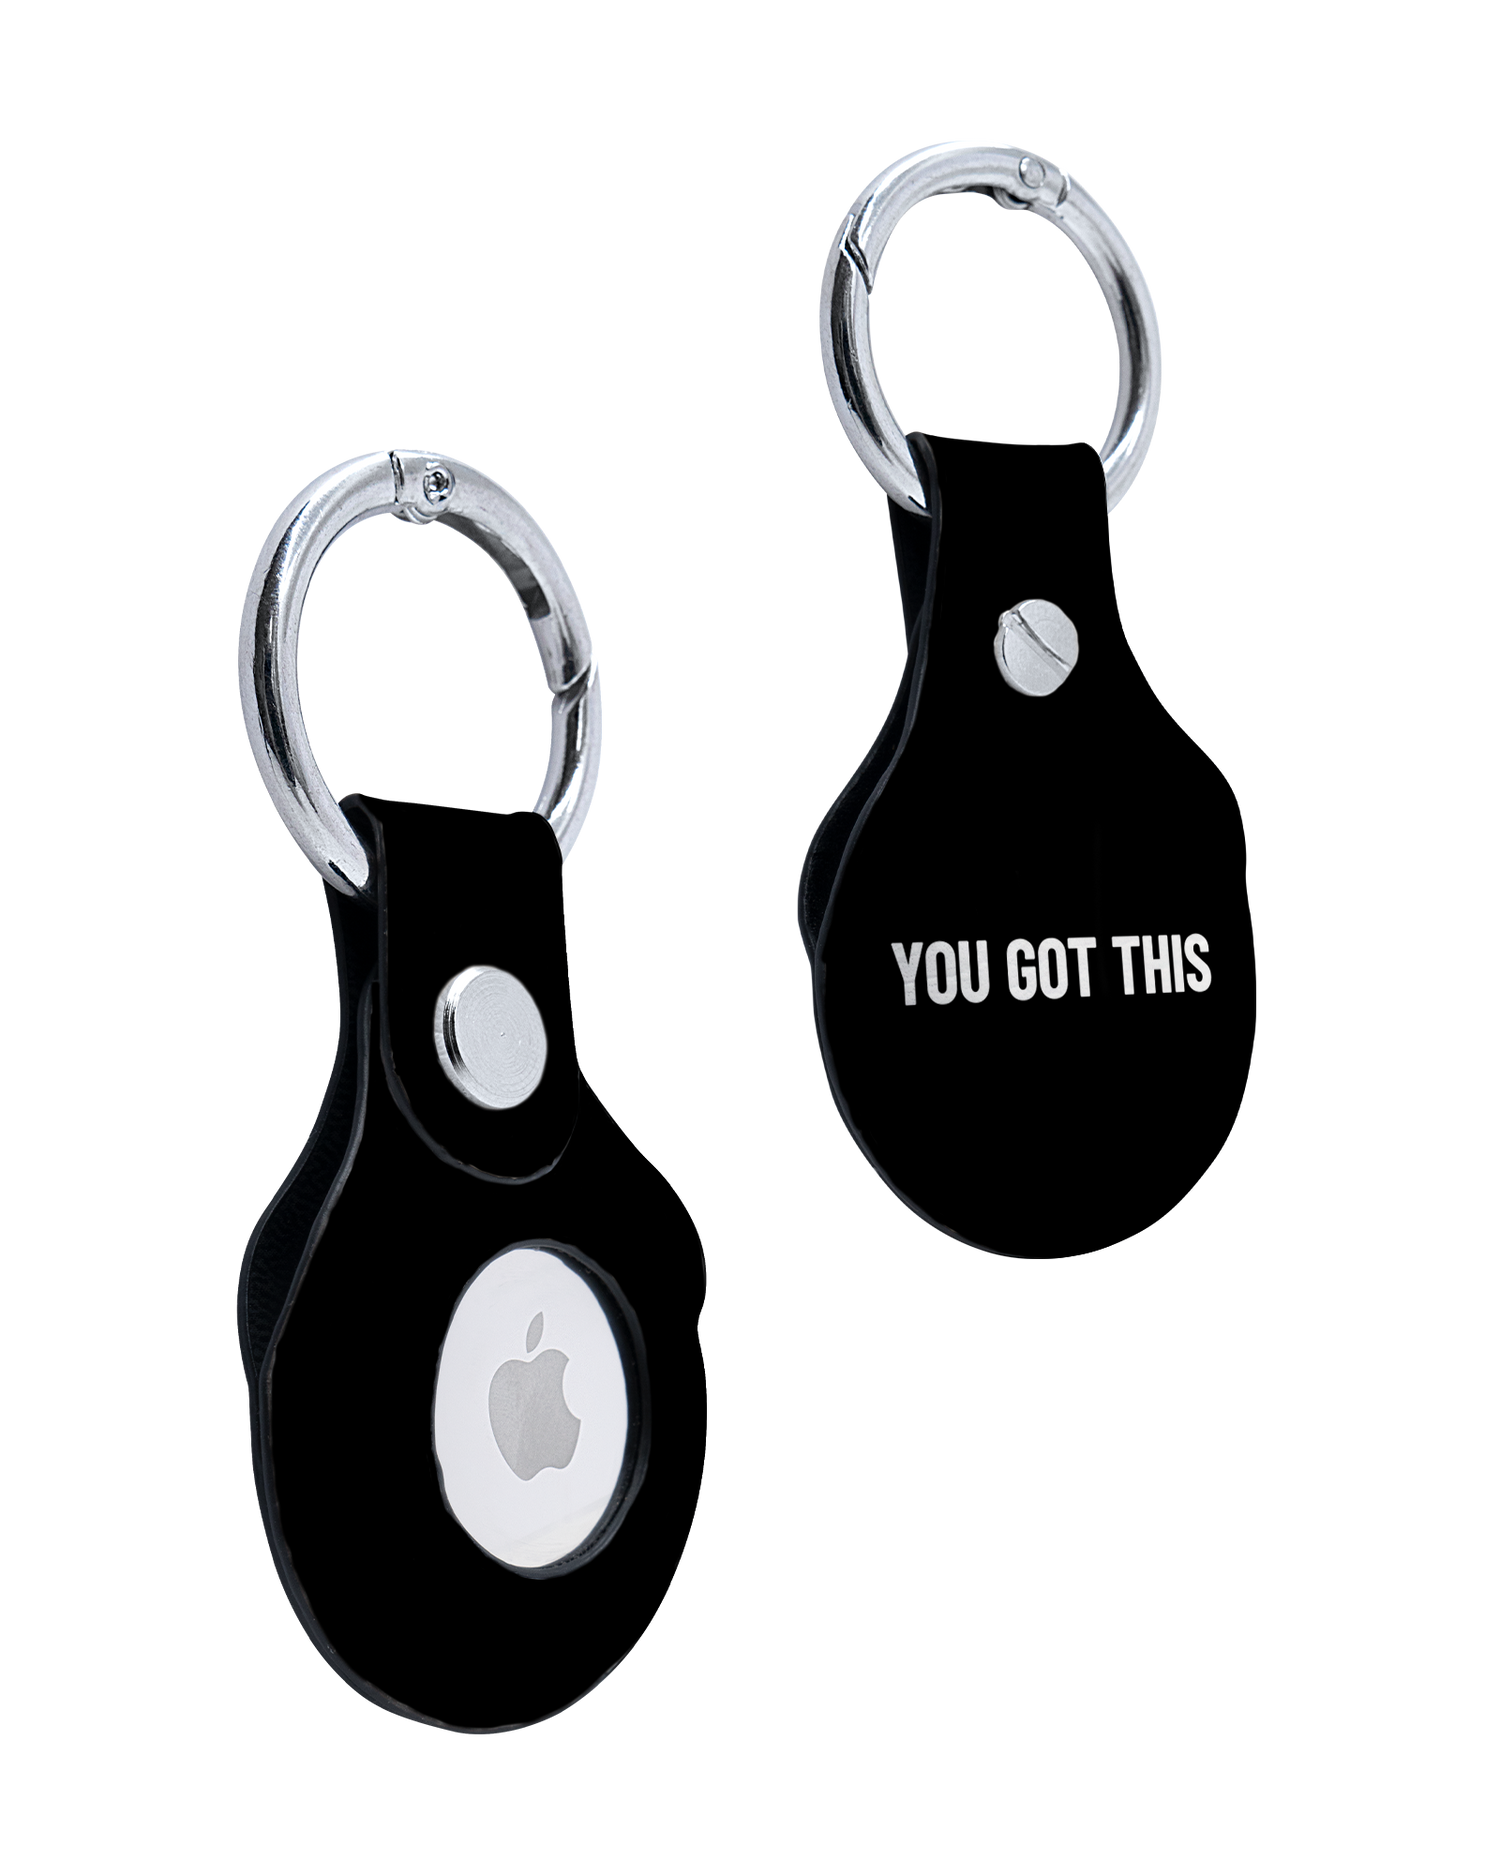 AirTag Holder with You Got This Black Design: Front and Back